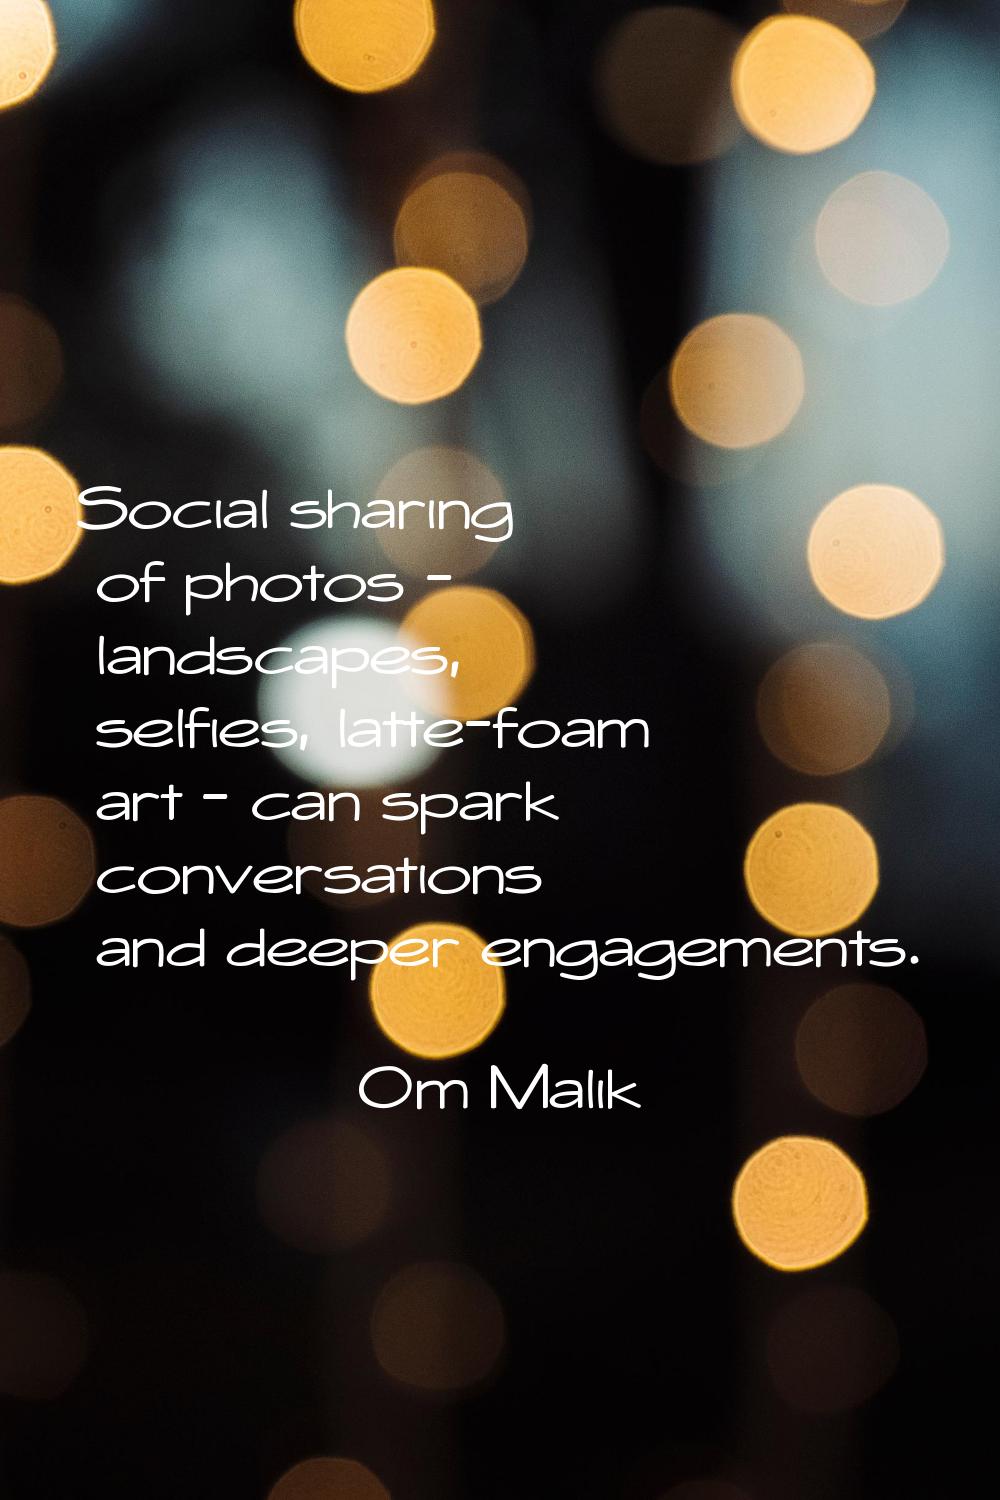 Social sharing of photos - landscapes, selfies, latte-foam art - can spark conversations and deeper